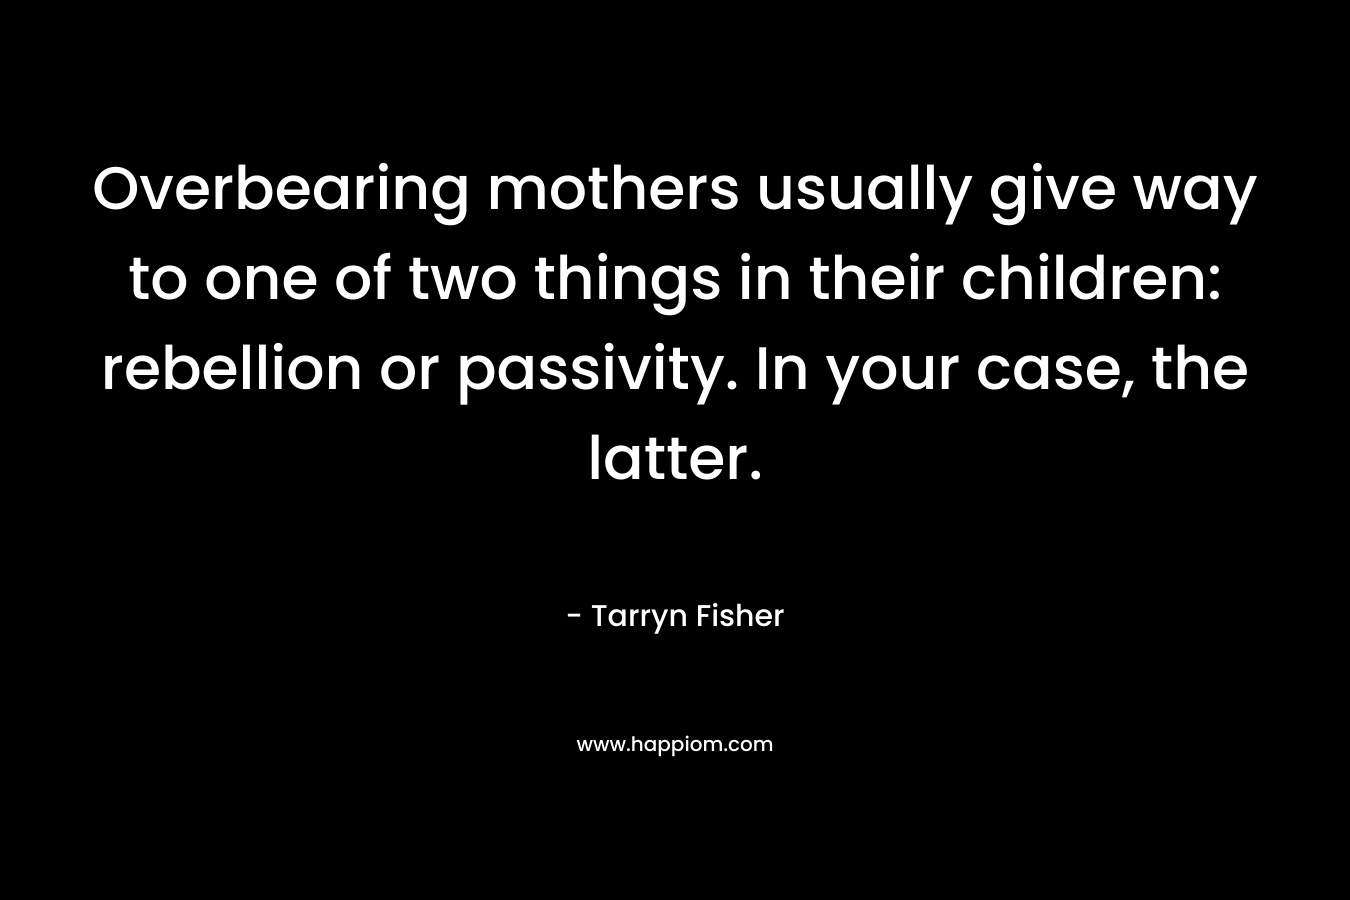 Overbearing mothers usually give way to one of two things in their children: rebellion or passivity. In your case, the latter. – Tarryn Fisher